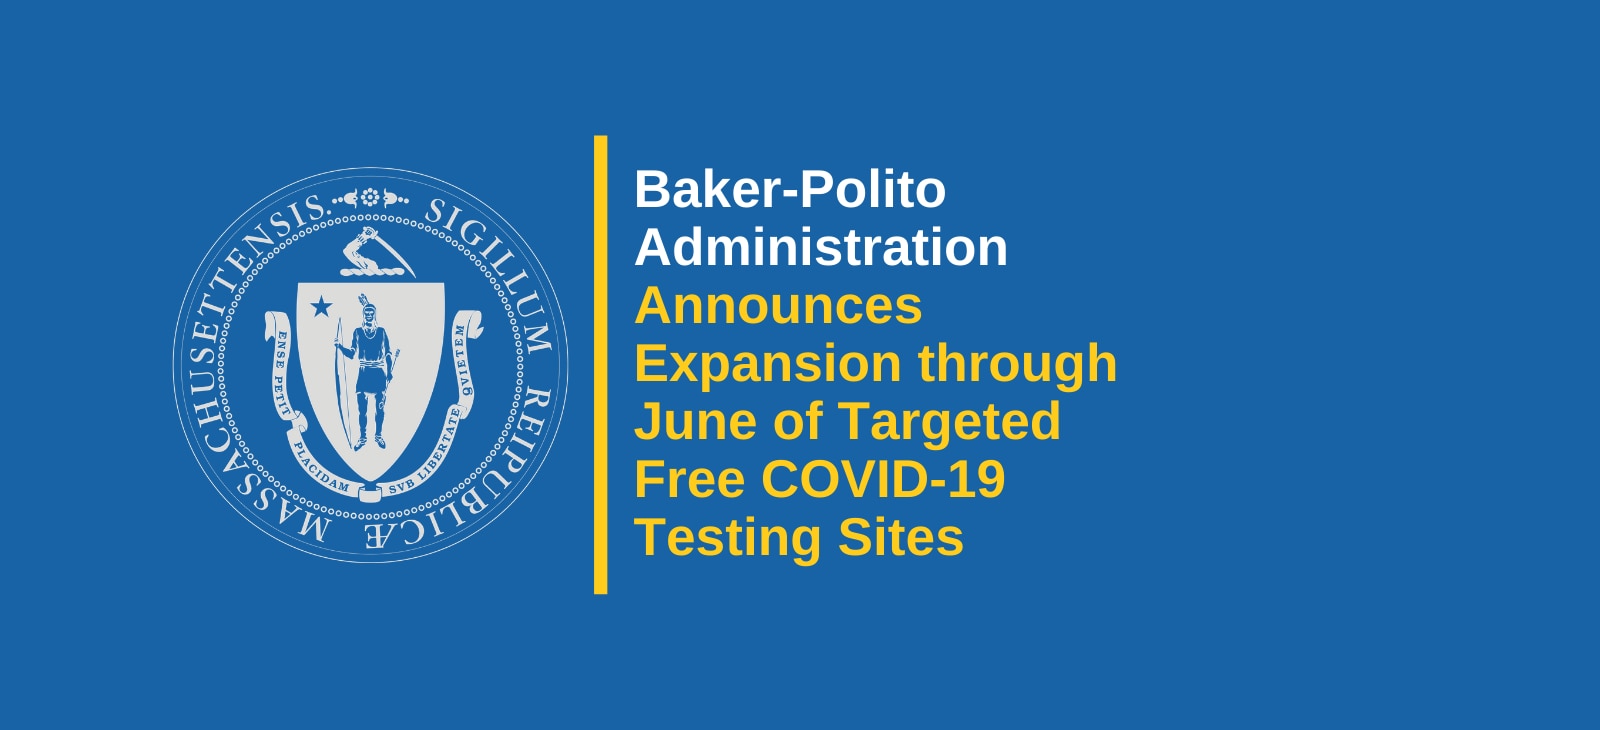 Baker-Polito Administration Announces Expansion through June of Targeted Free COVID-19 Testing Sites